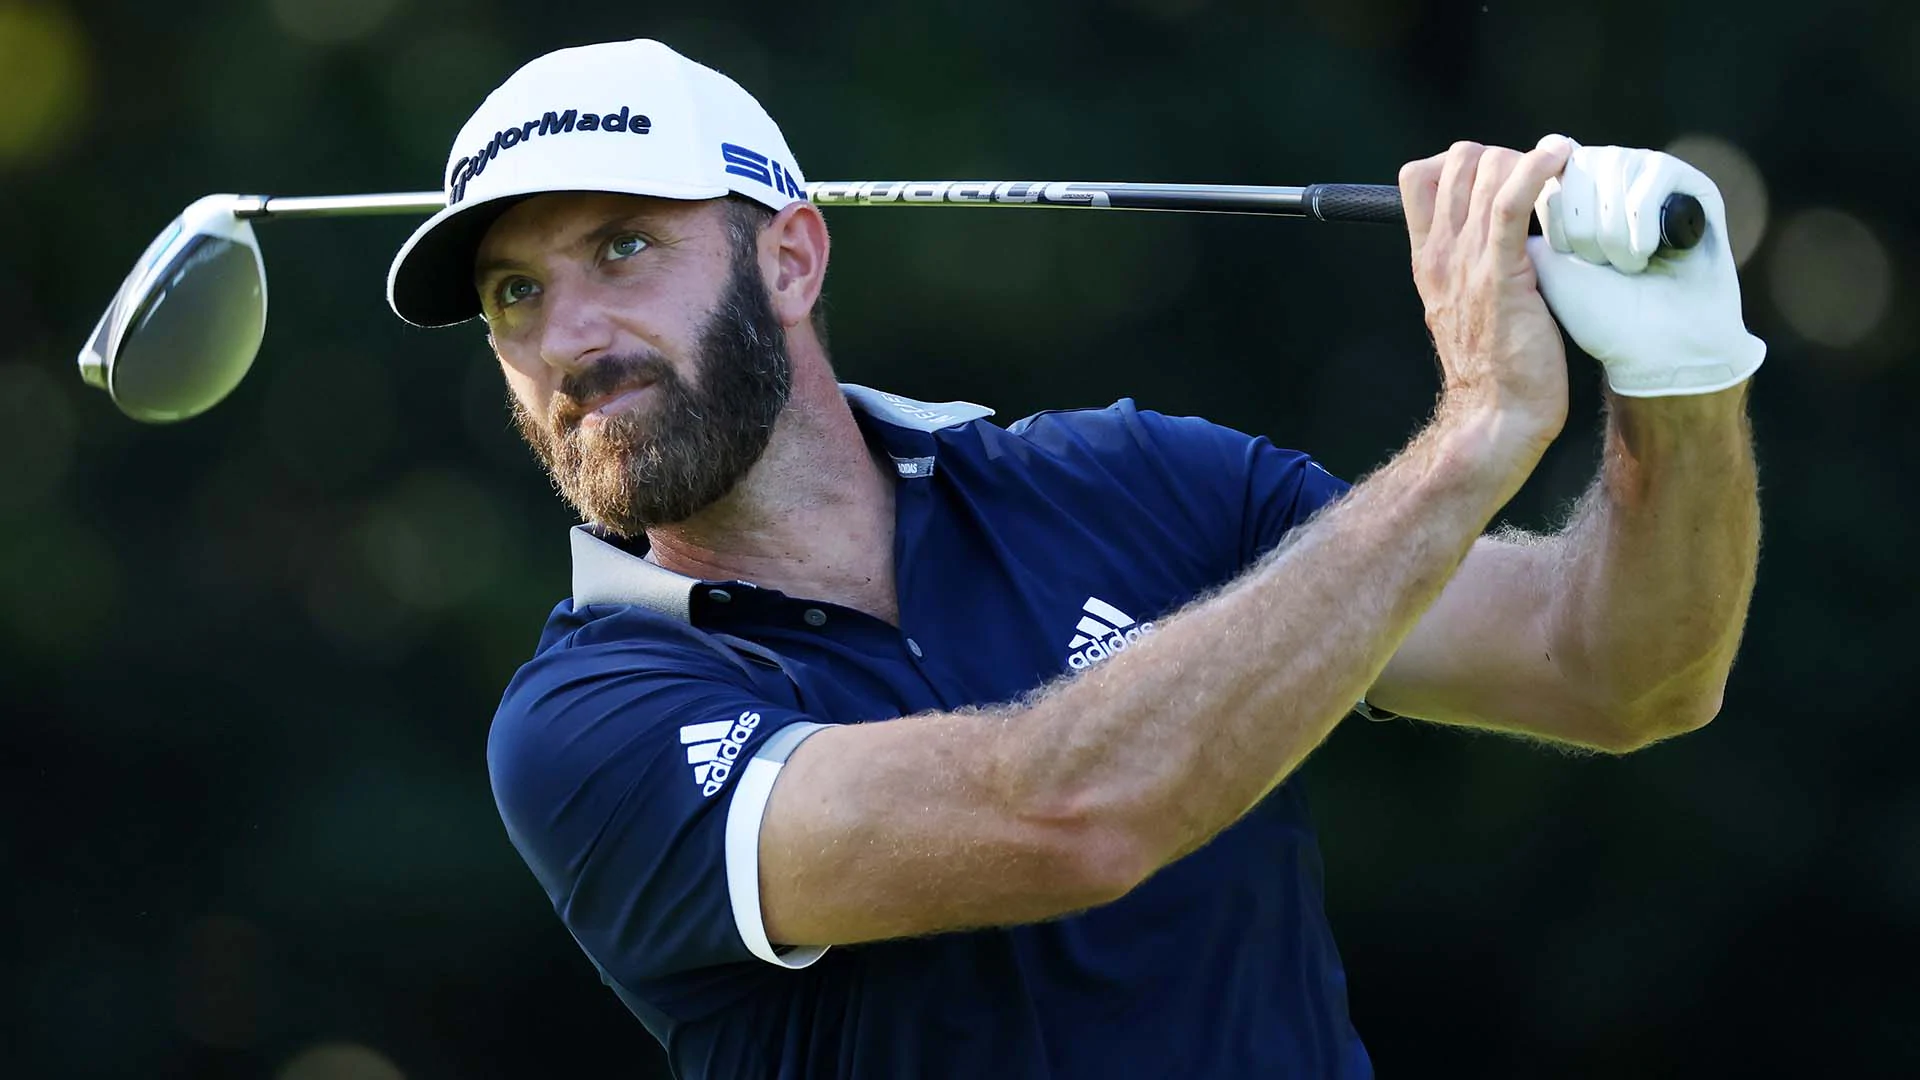 Dustin Johnson almost switched to longer driver shaft before Masters win